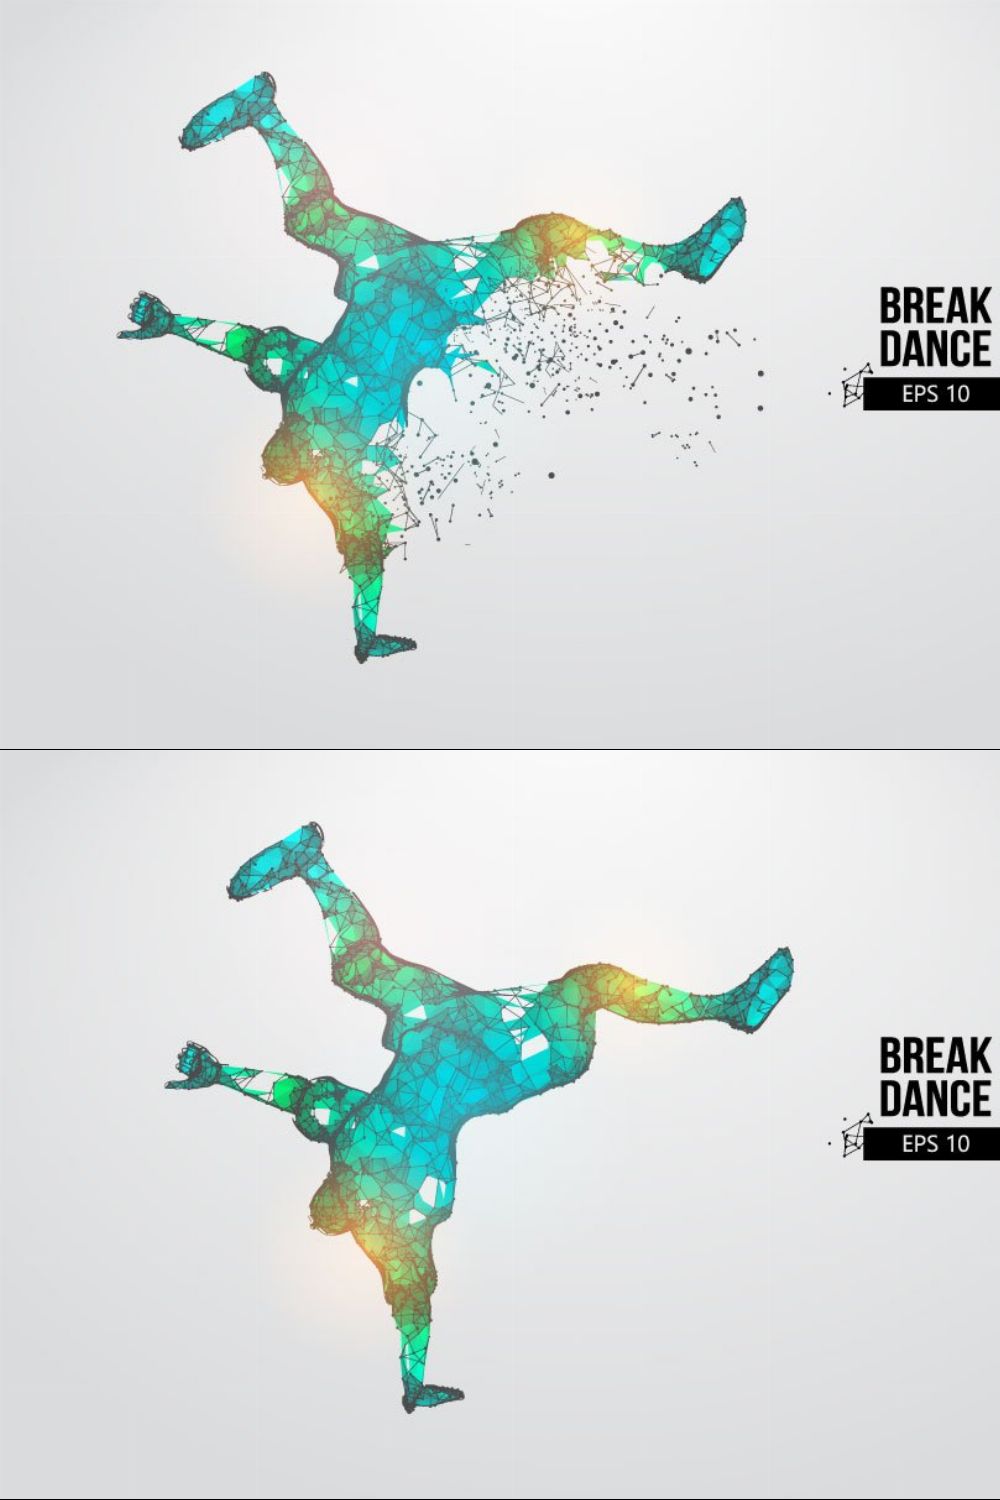 Silhouettes of a breake dancer man pinterest preview image.